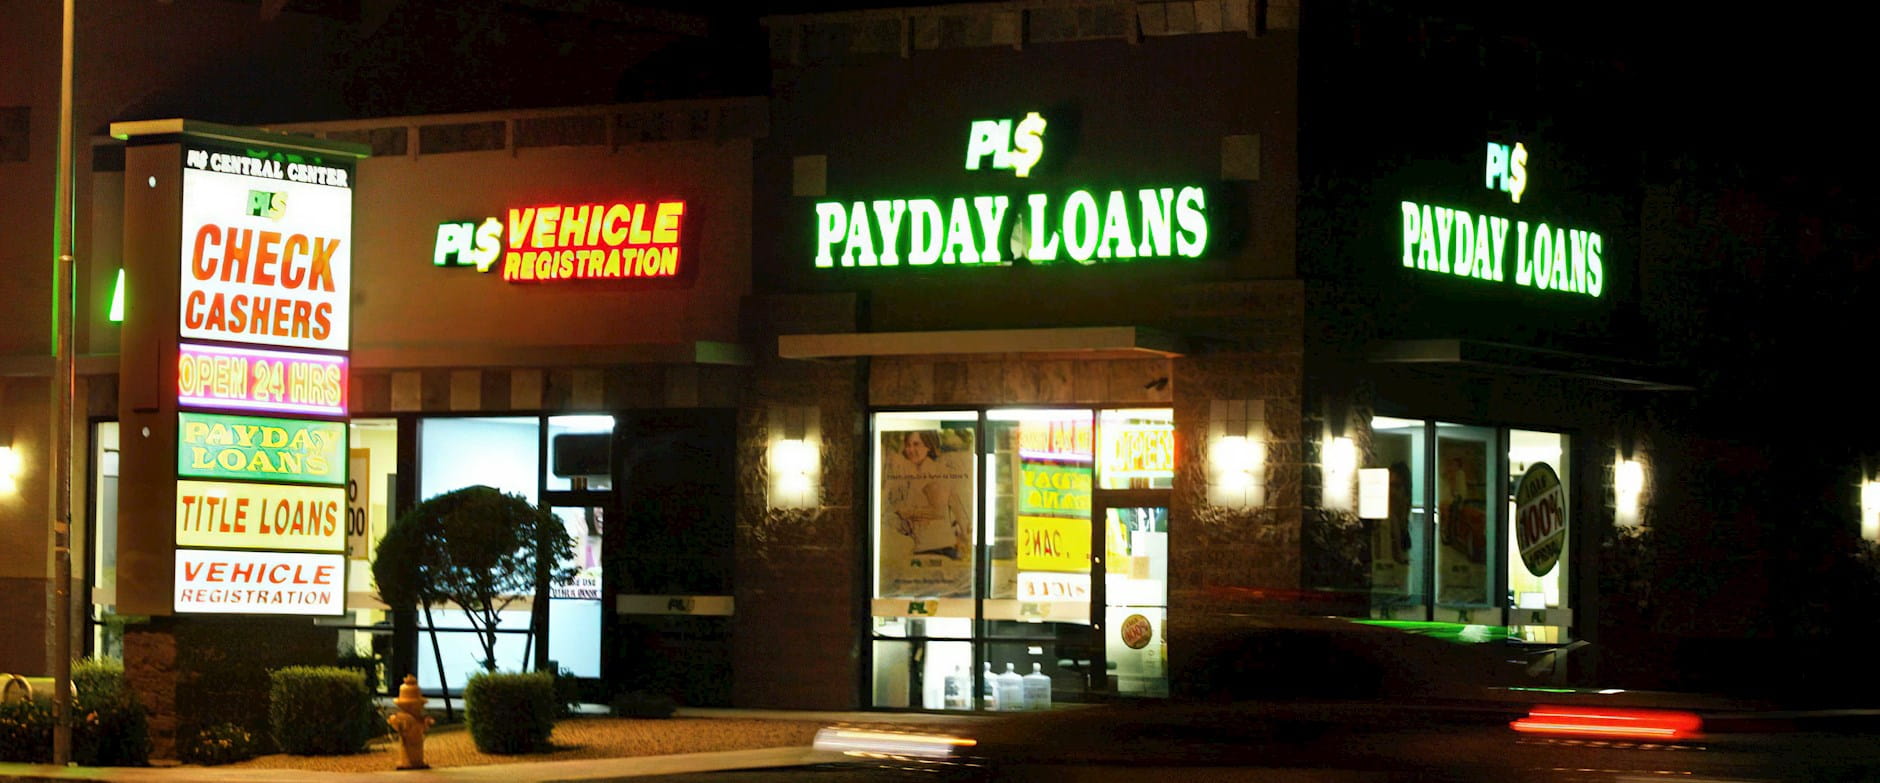 Payday loans shop